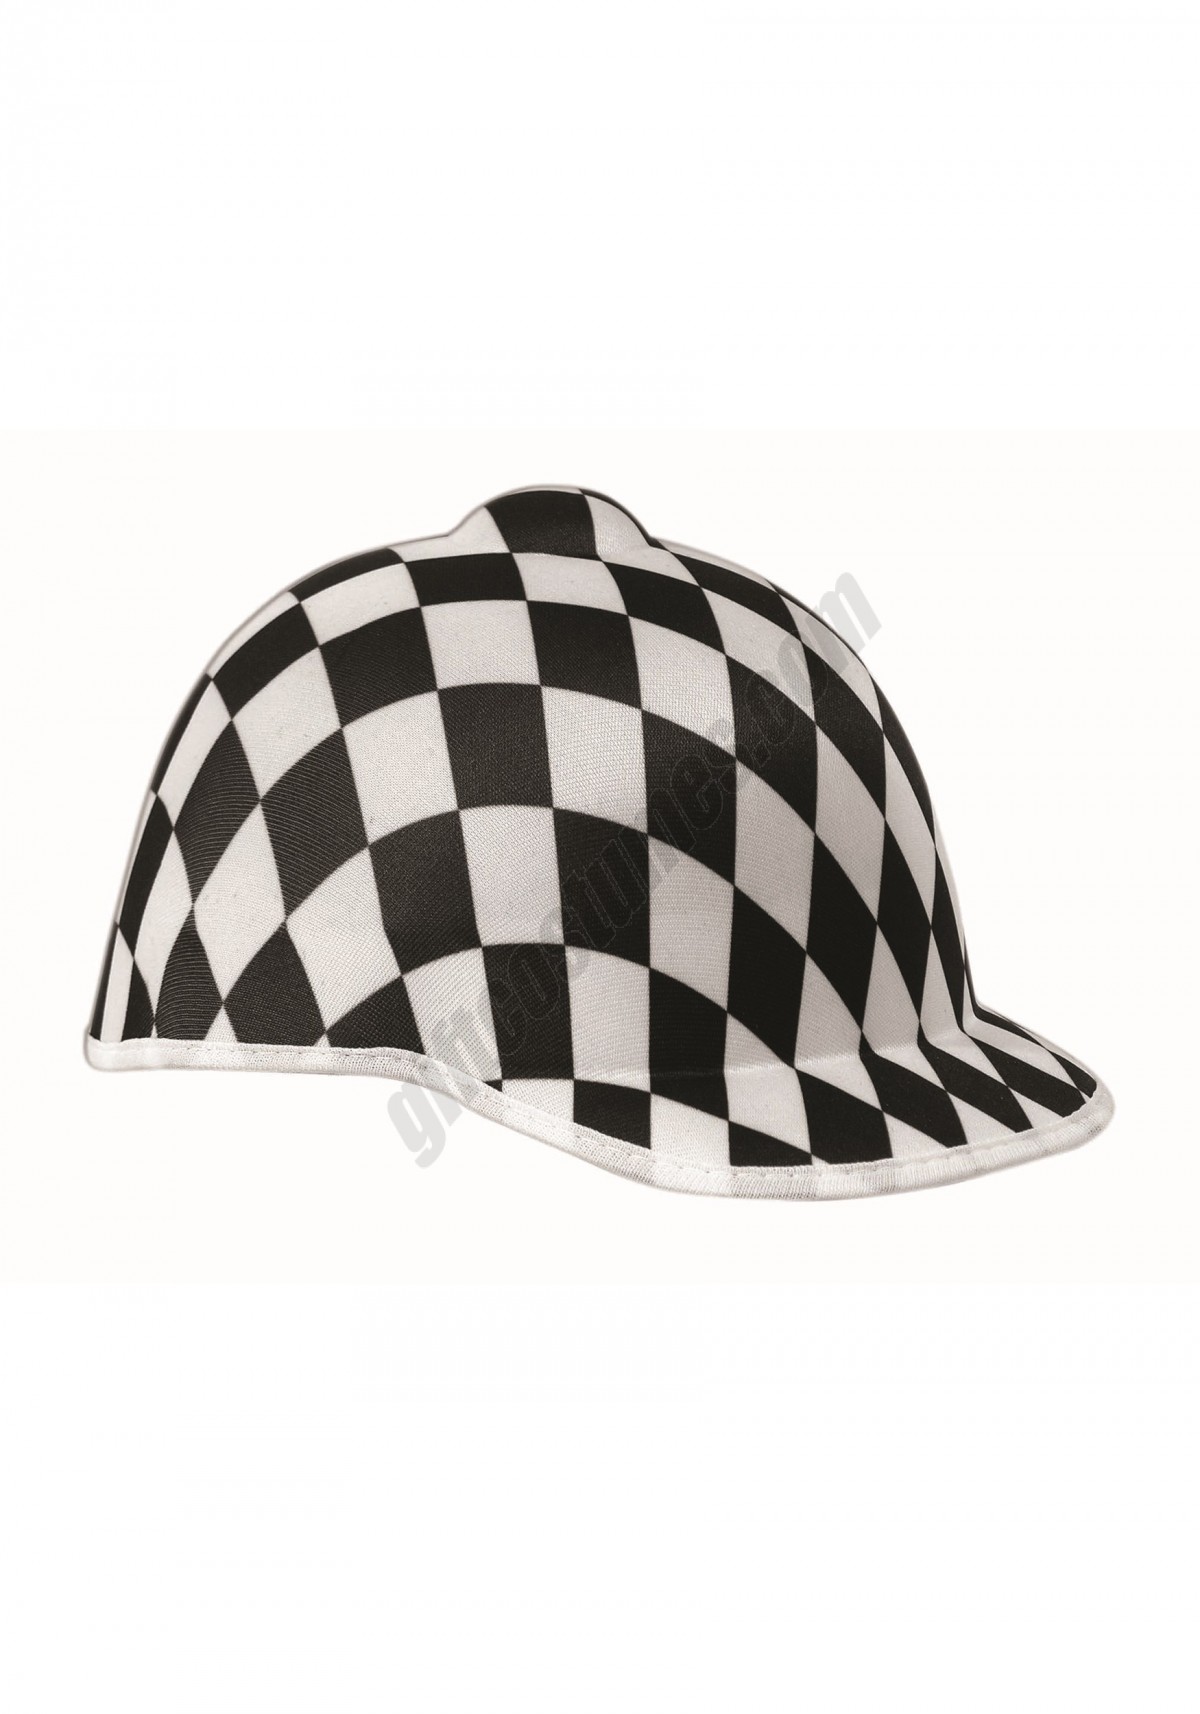 Black and White Checkered Jockey Hat Promotions - -0